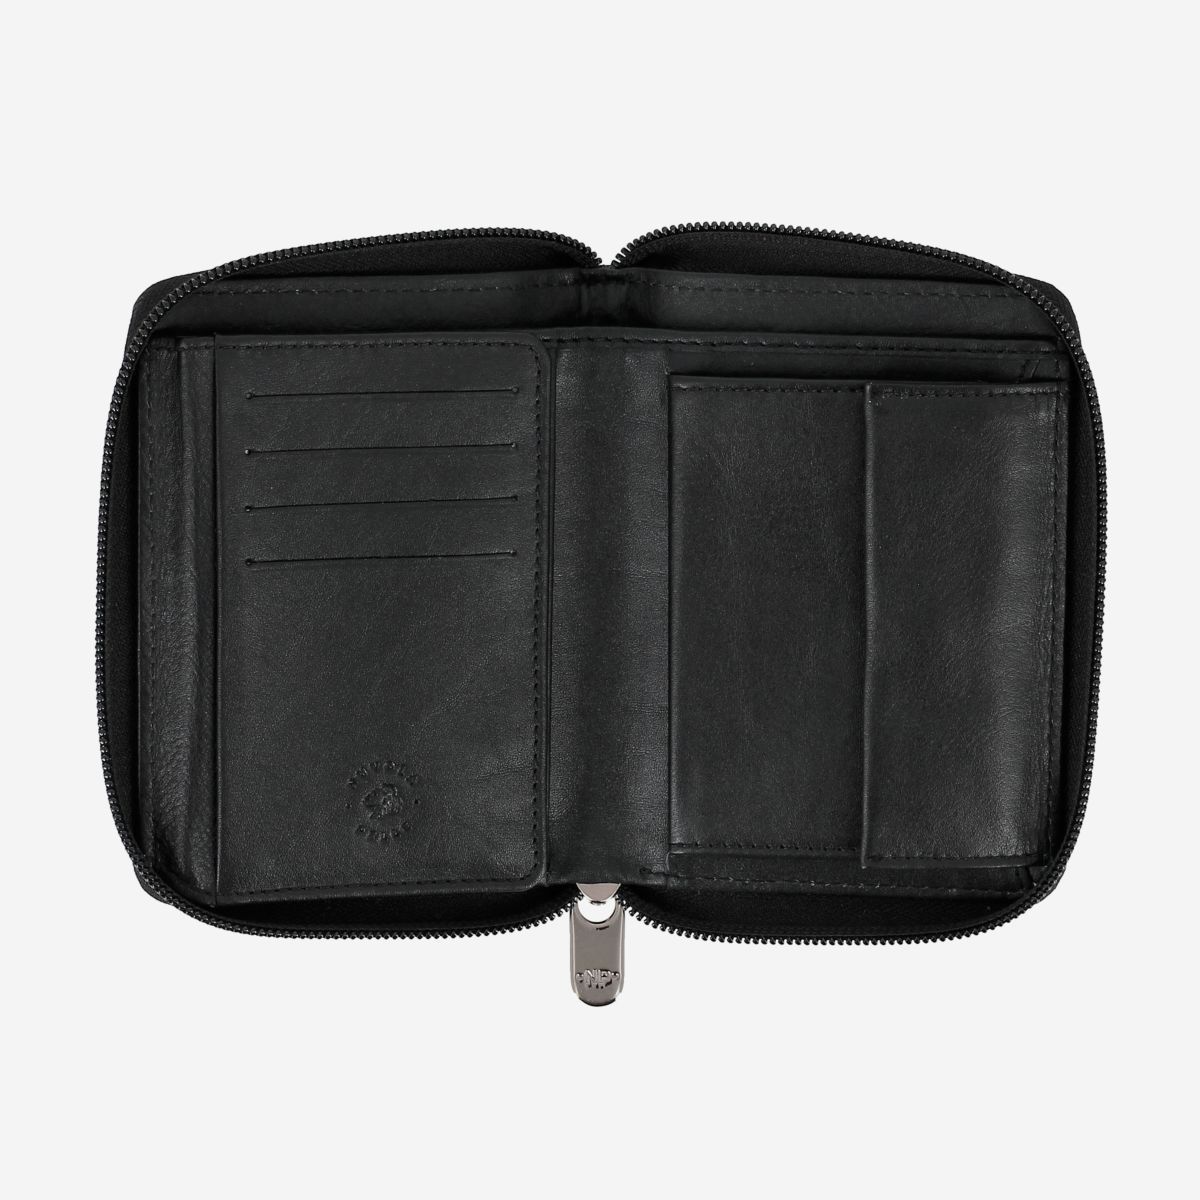 NUVOLA PELLE Mens Leather Wallet with Zip - Black